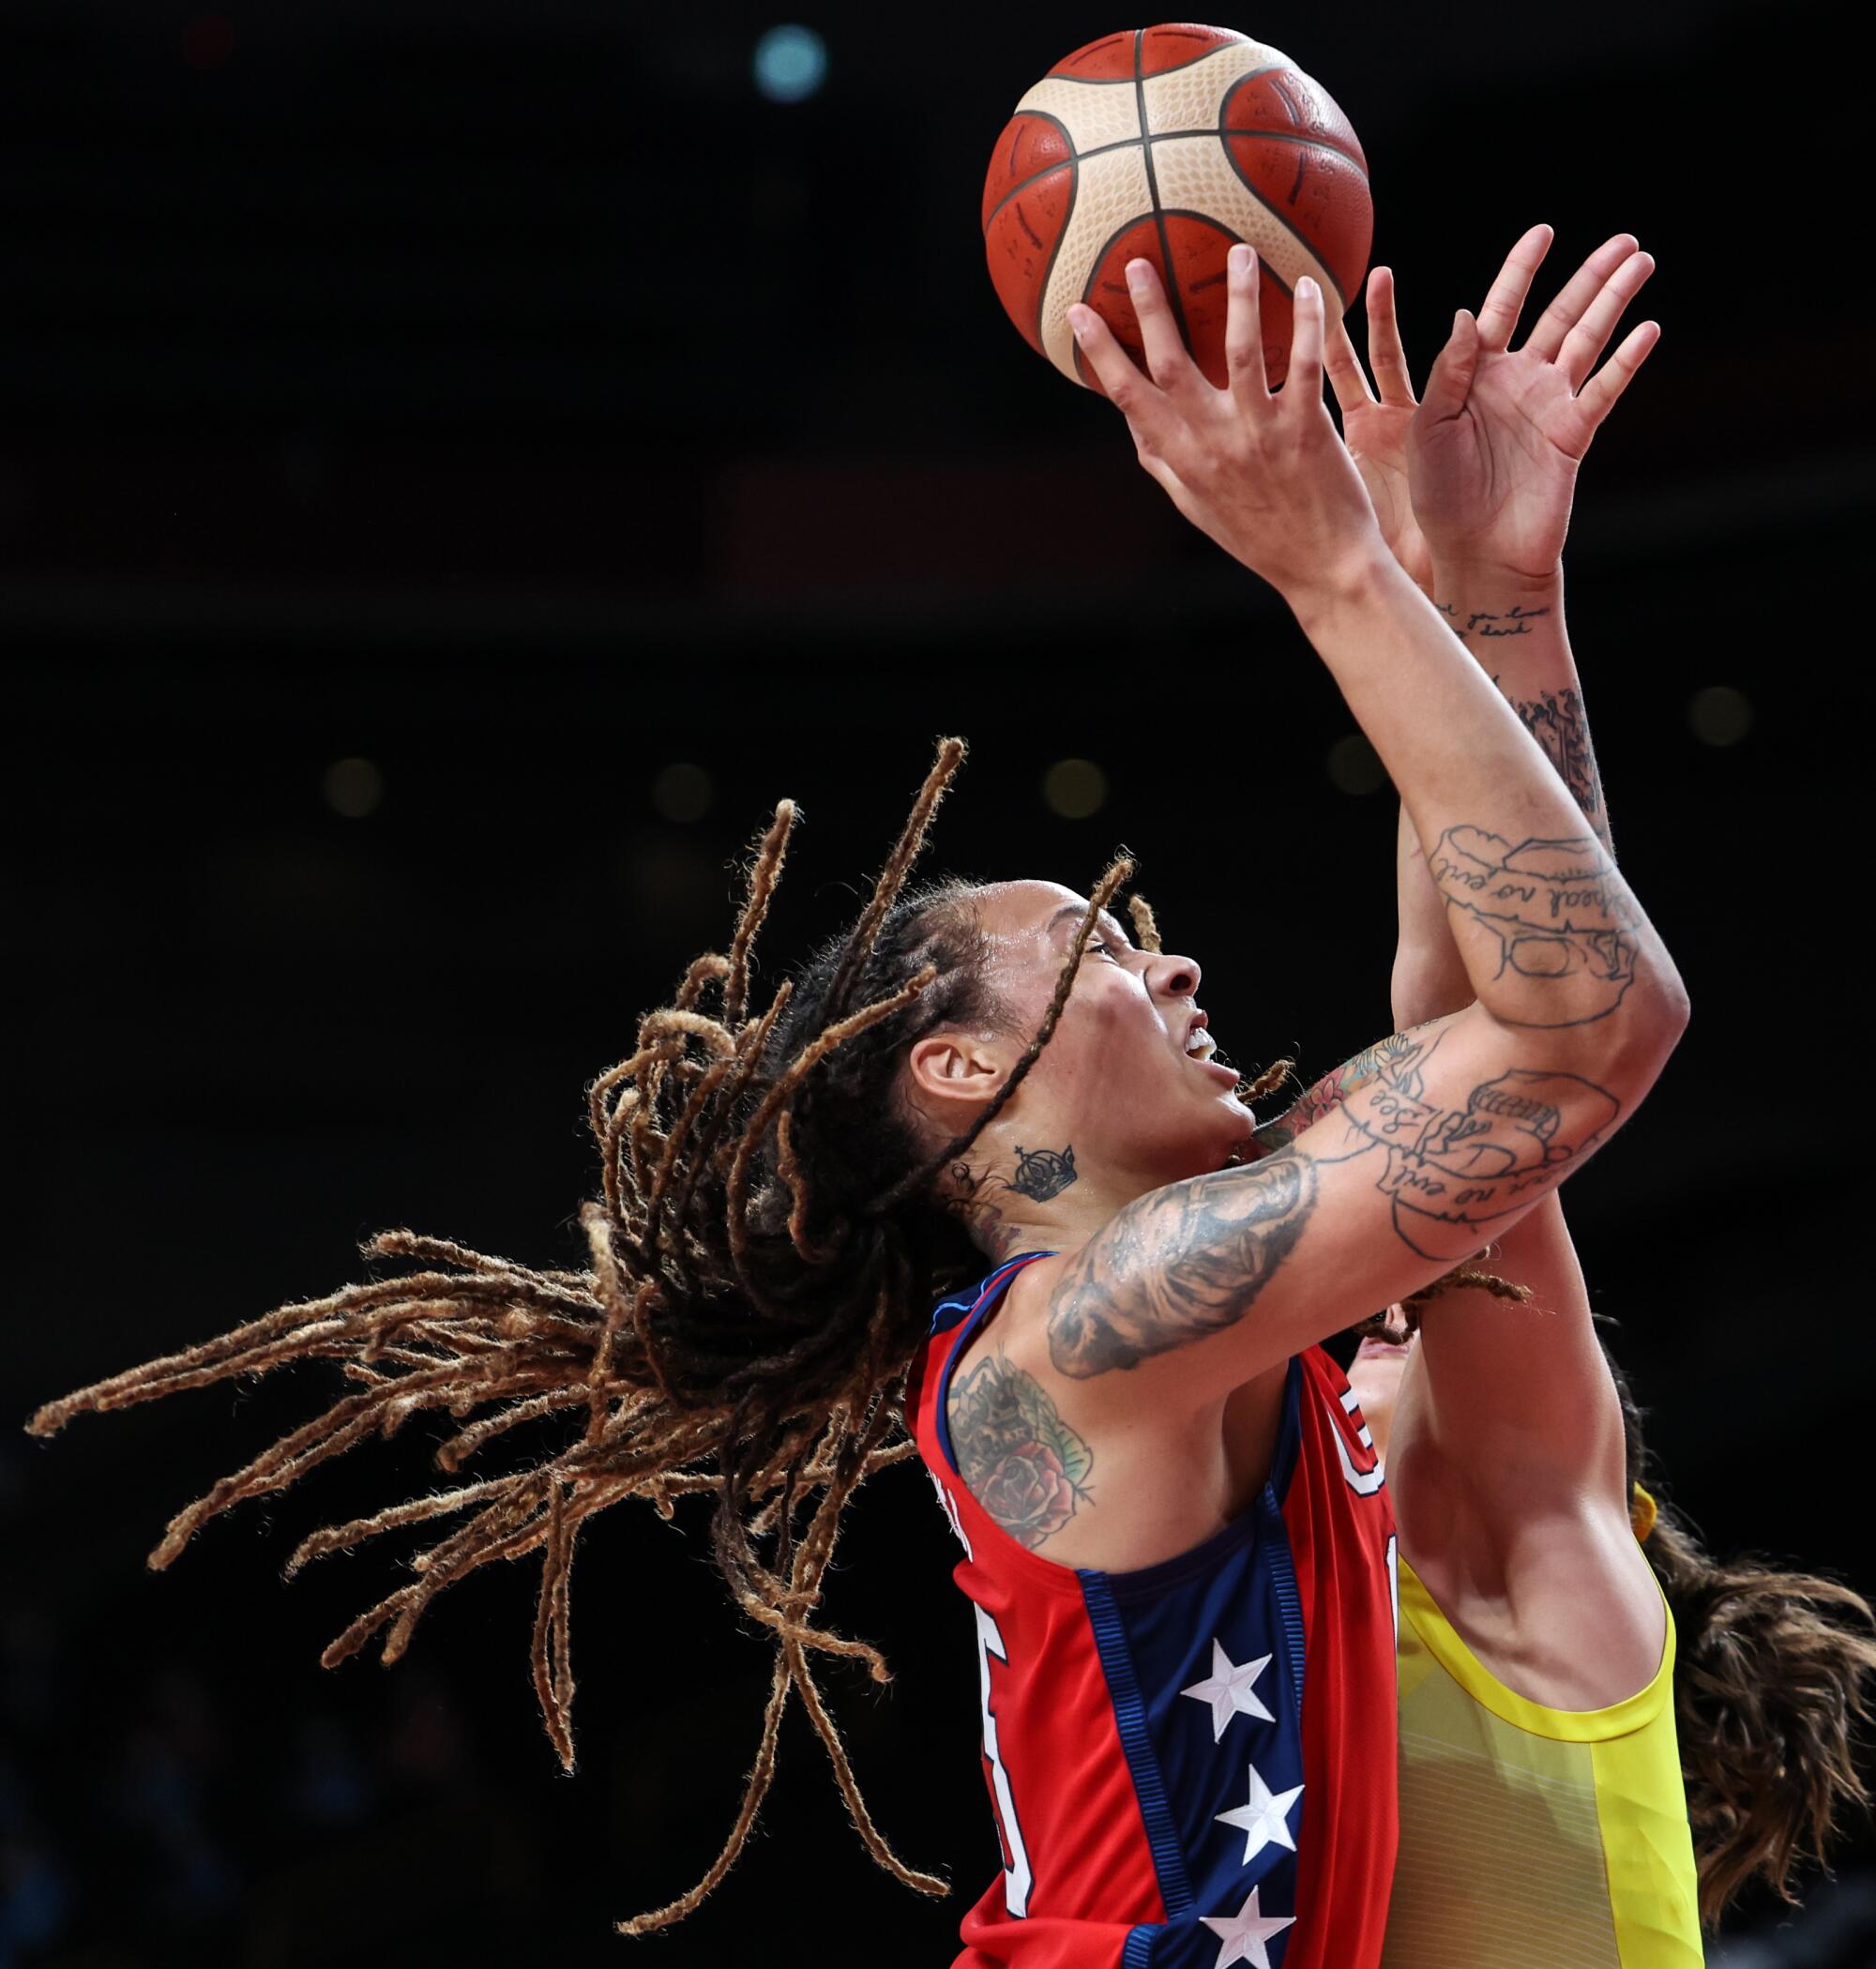 Brittney Griner shoots over Marianna Tolo during women's basketball at the Tokyo Olympics.